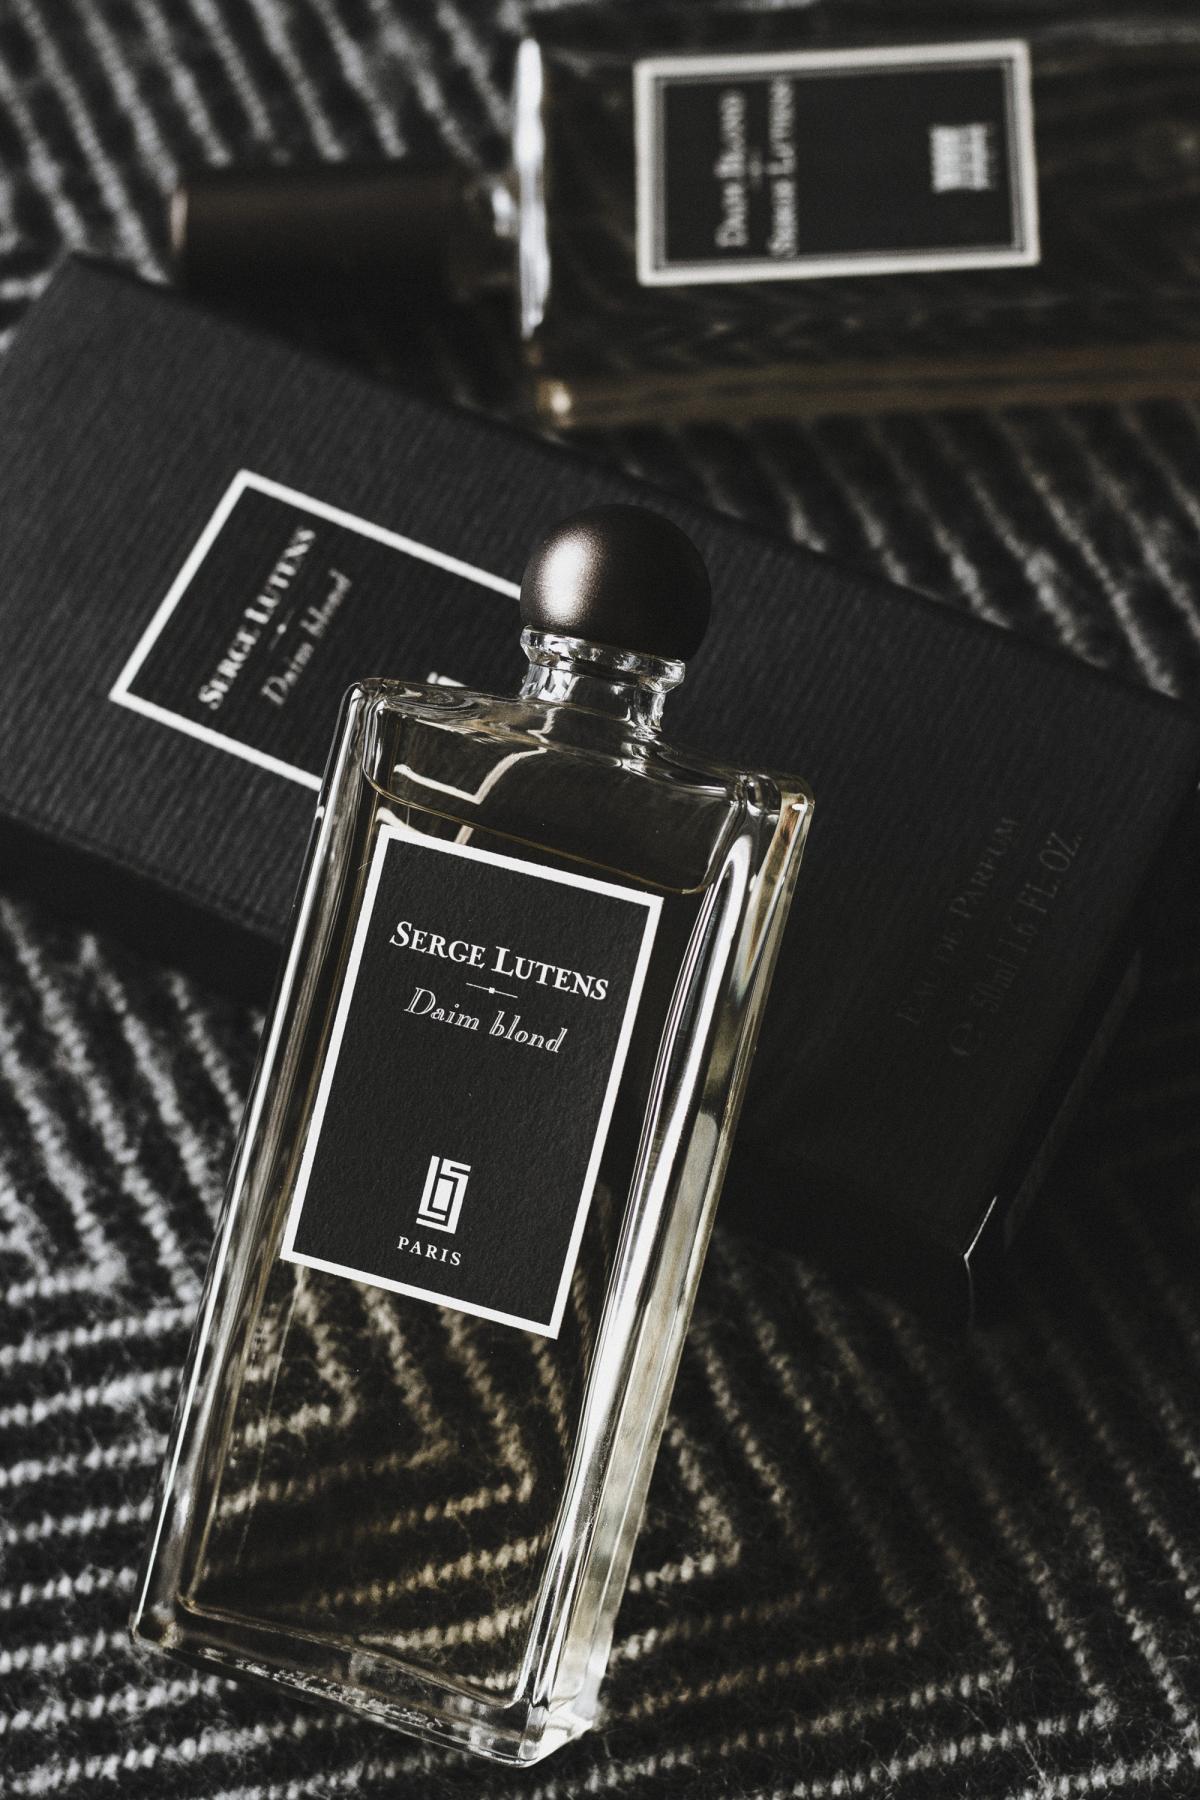 Daim Blond Serge Lutens perfume - a fragrance for women and men 2004